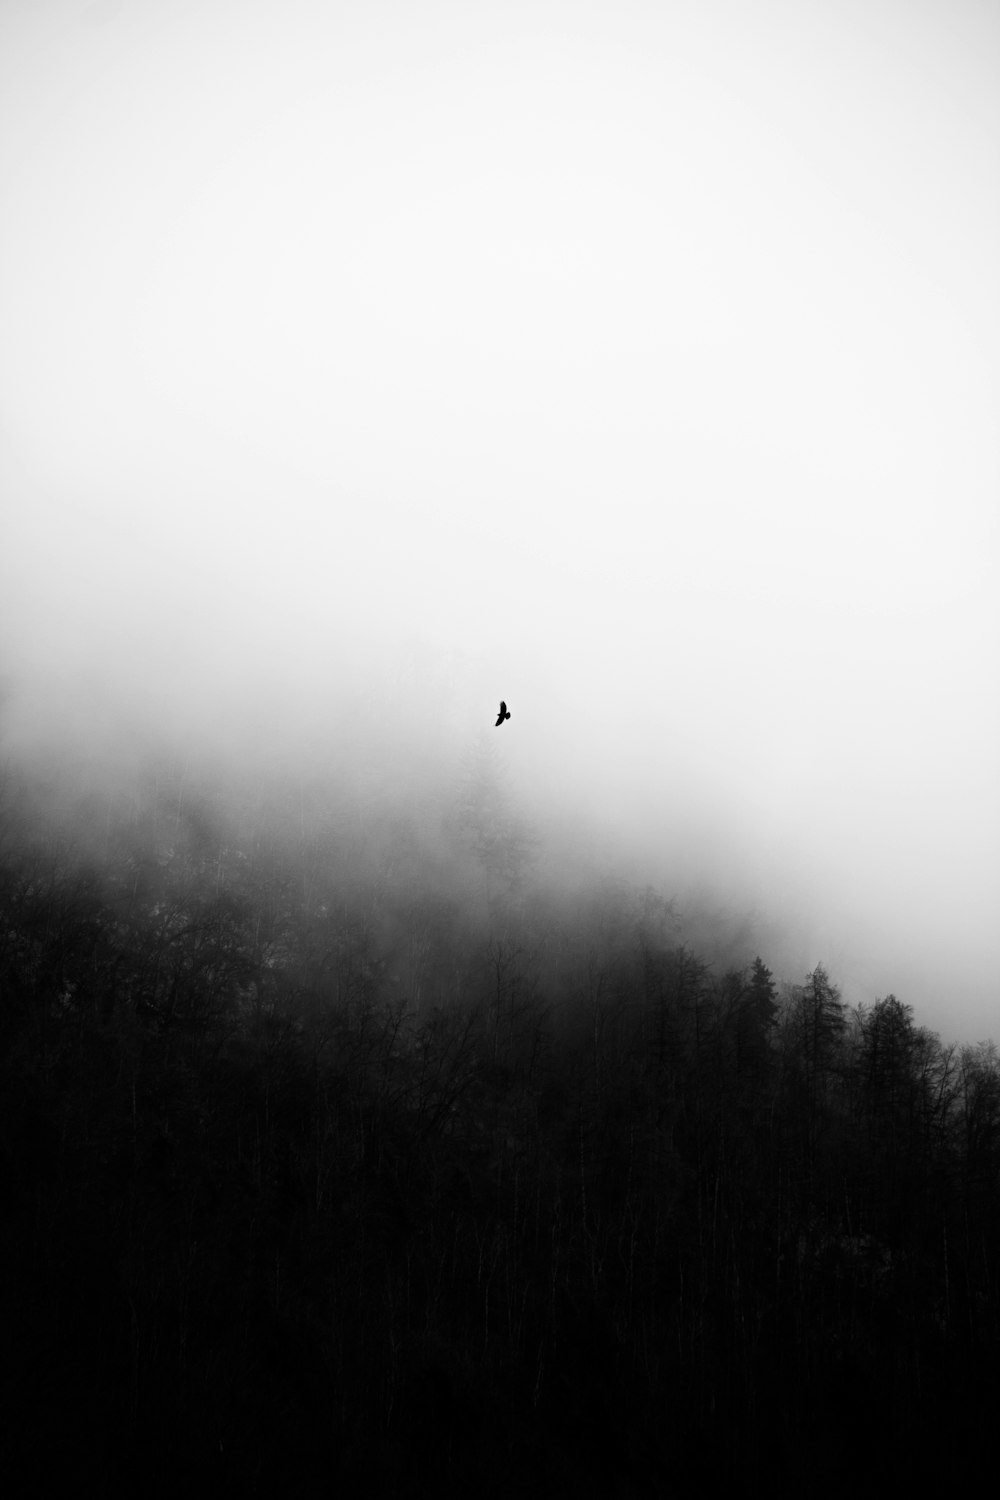 a bird flying over trees